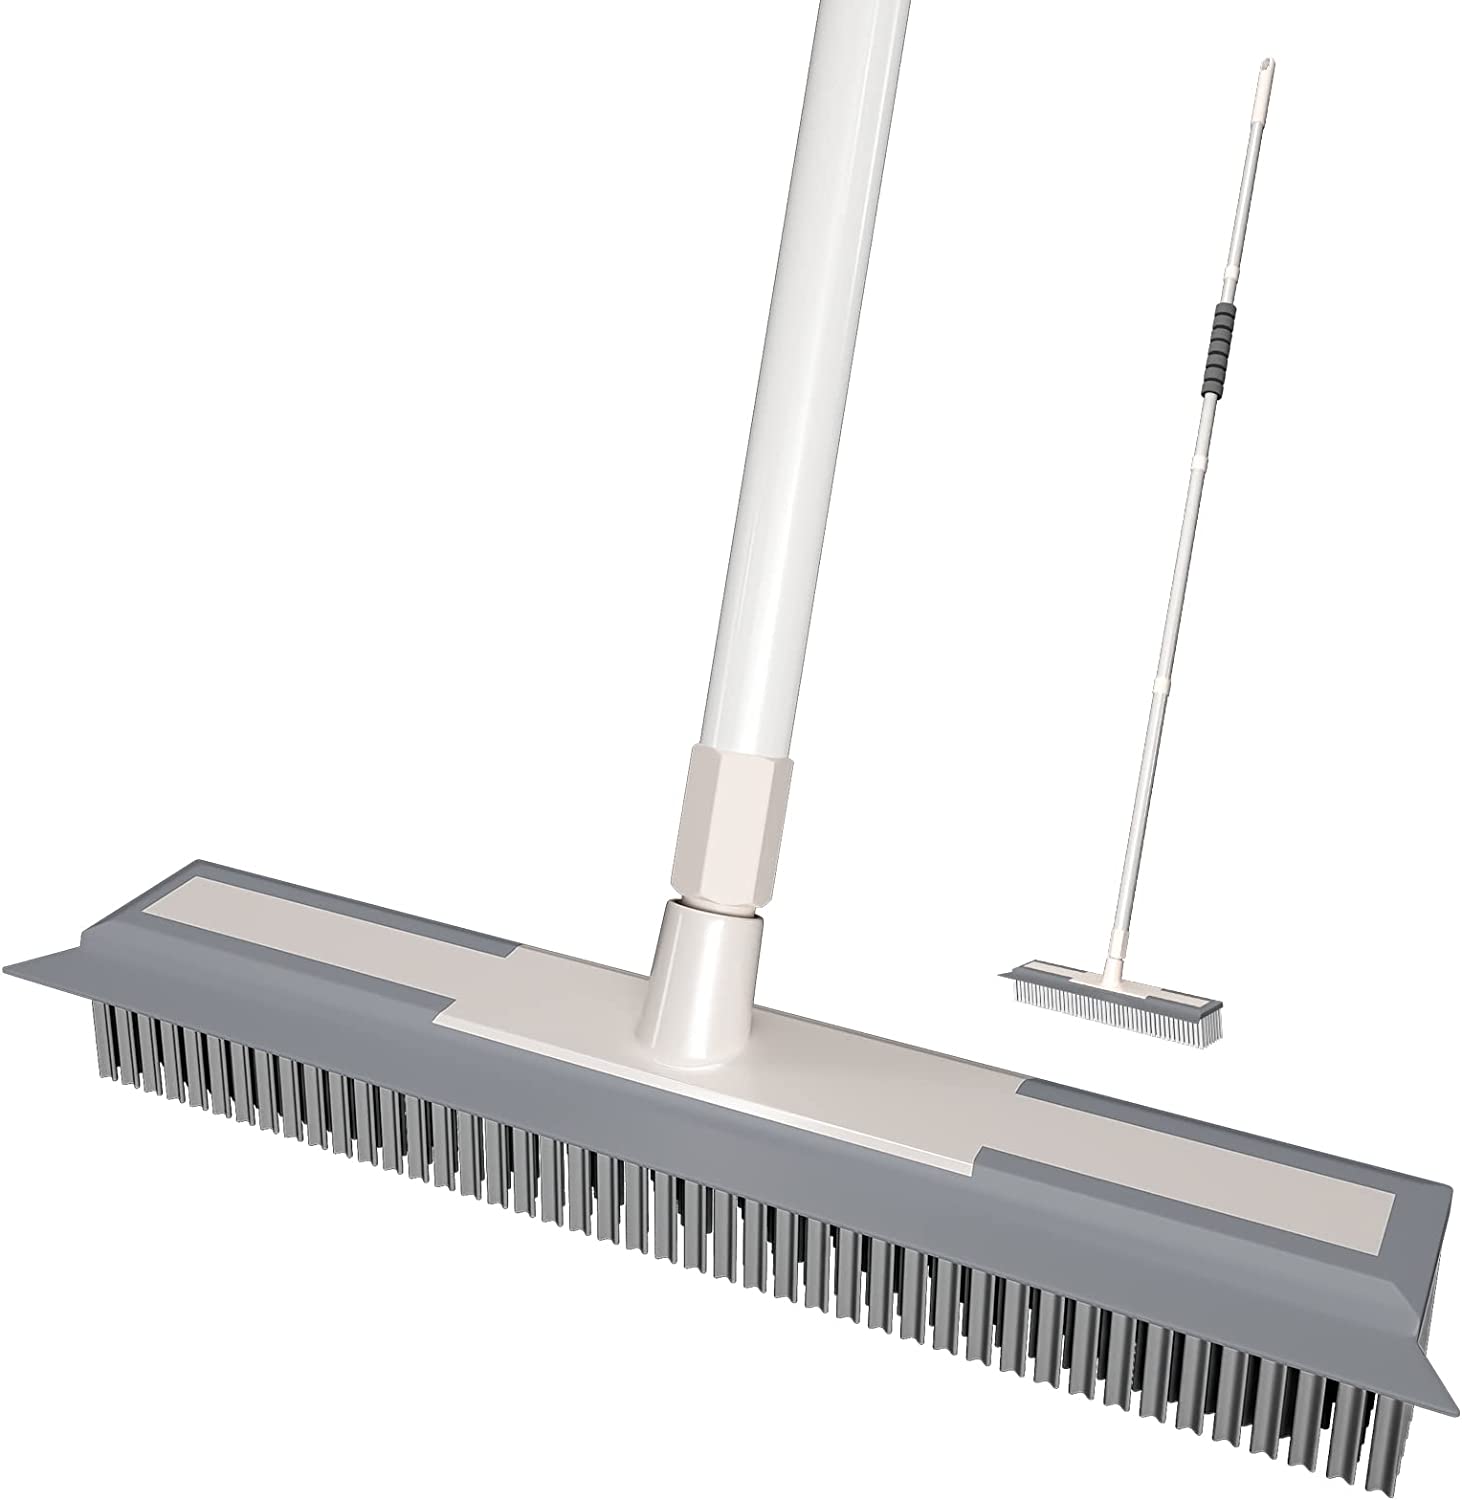 Rubber Broom Carpet Rake With Squeegee Long Handle For Pet Hair